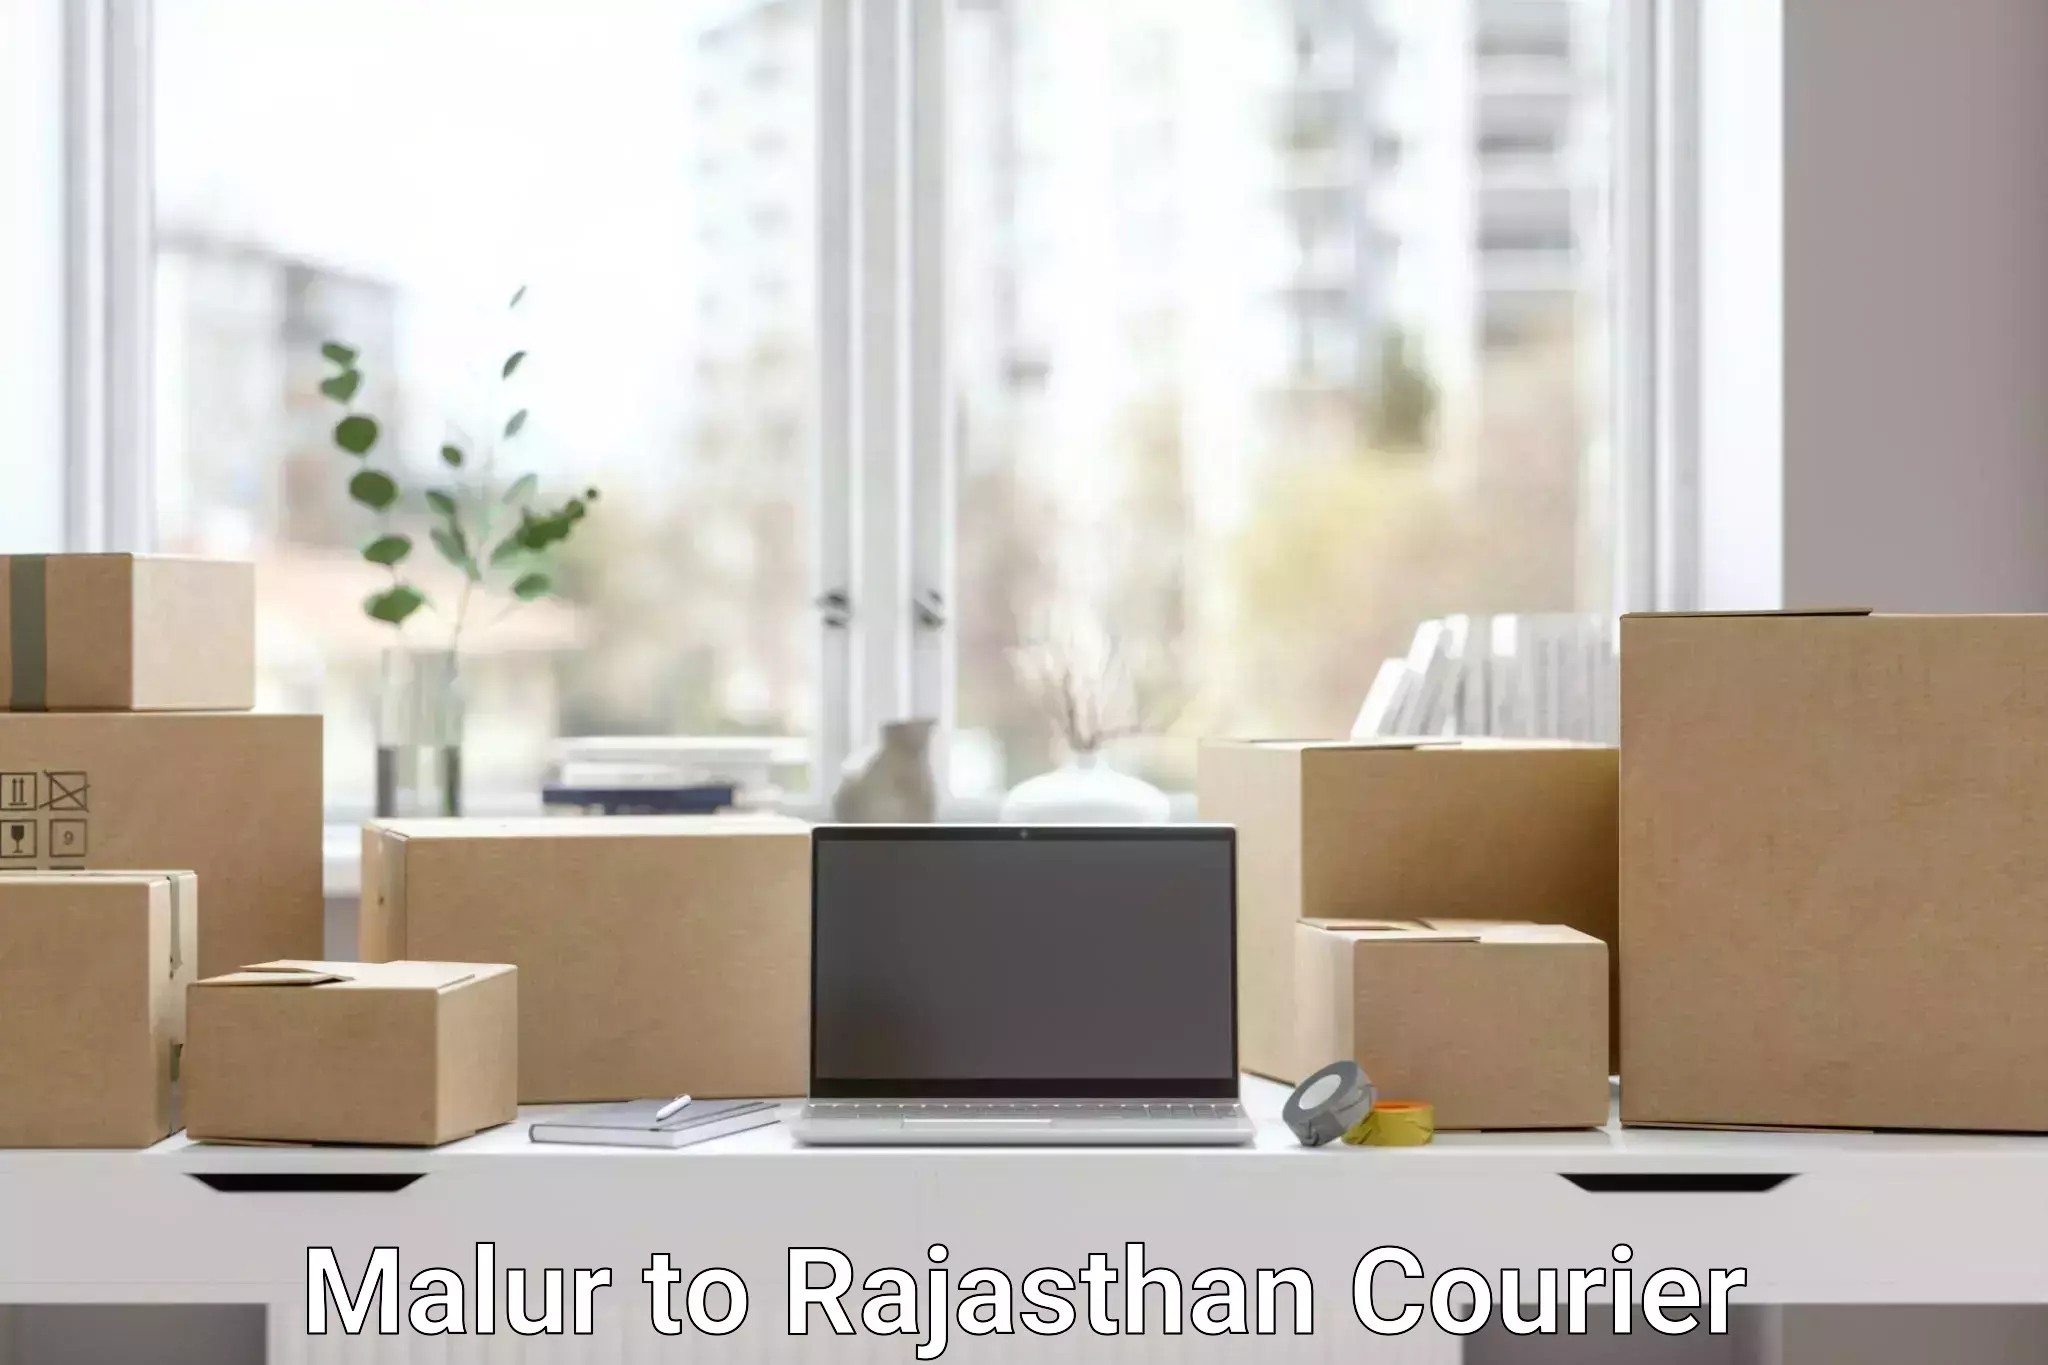 Full-service courier options in Malur to Rajasthan